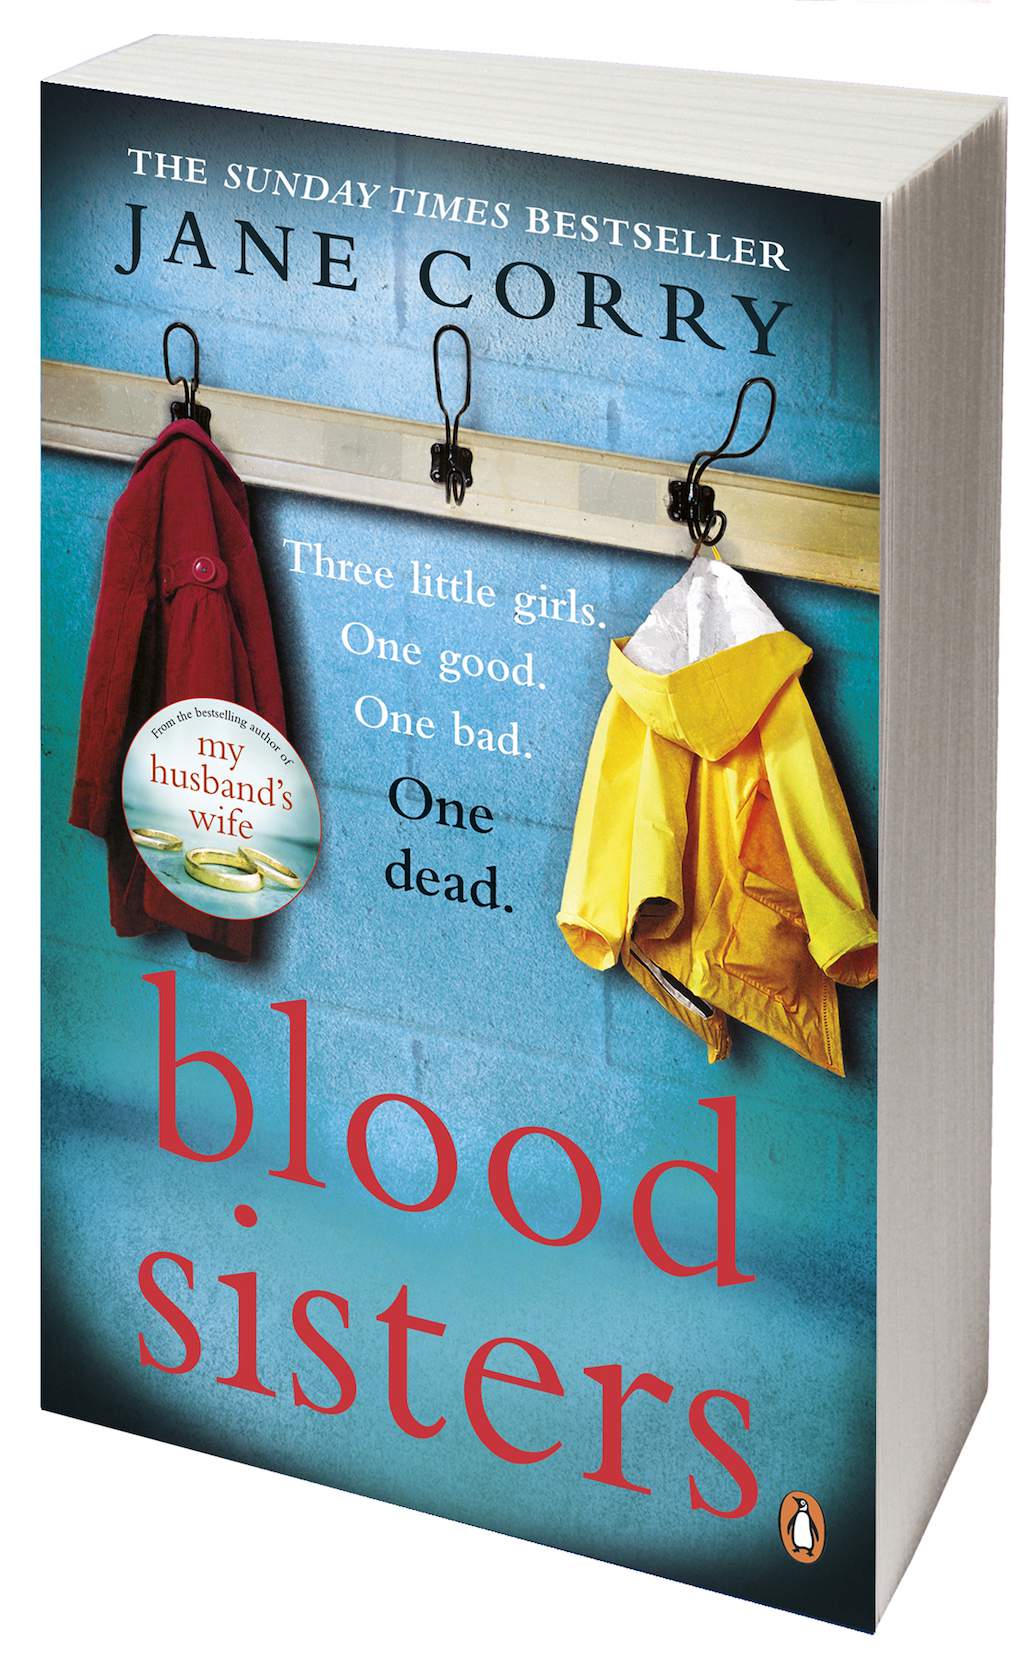 Penguin Dead Good - Blood Sisters by Jane Corry